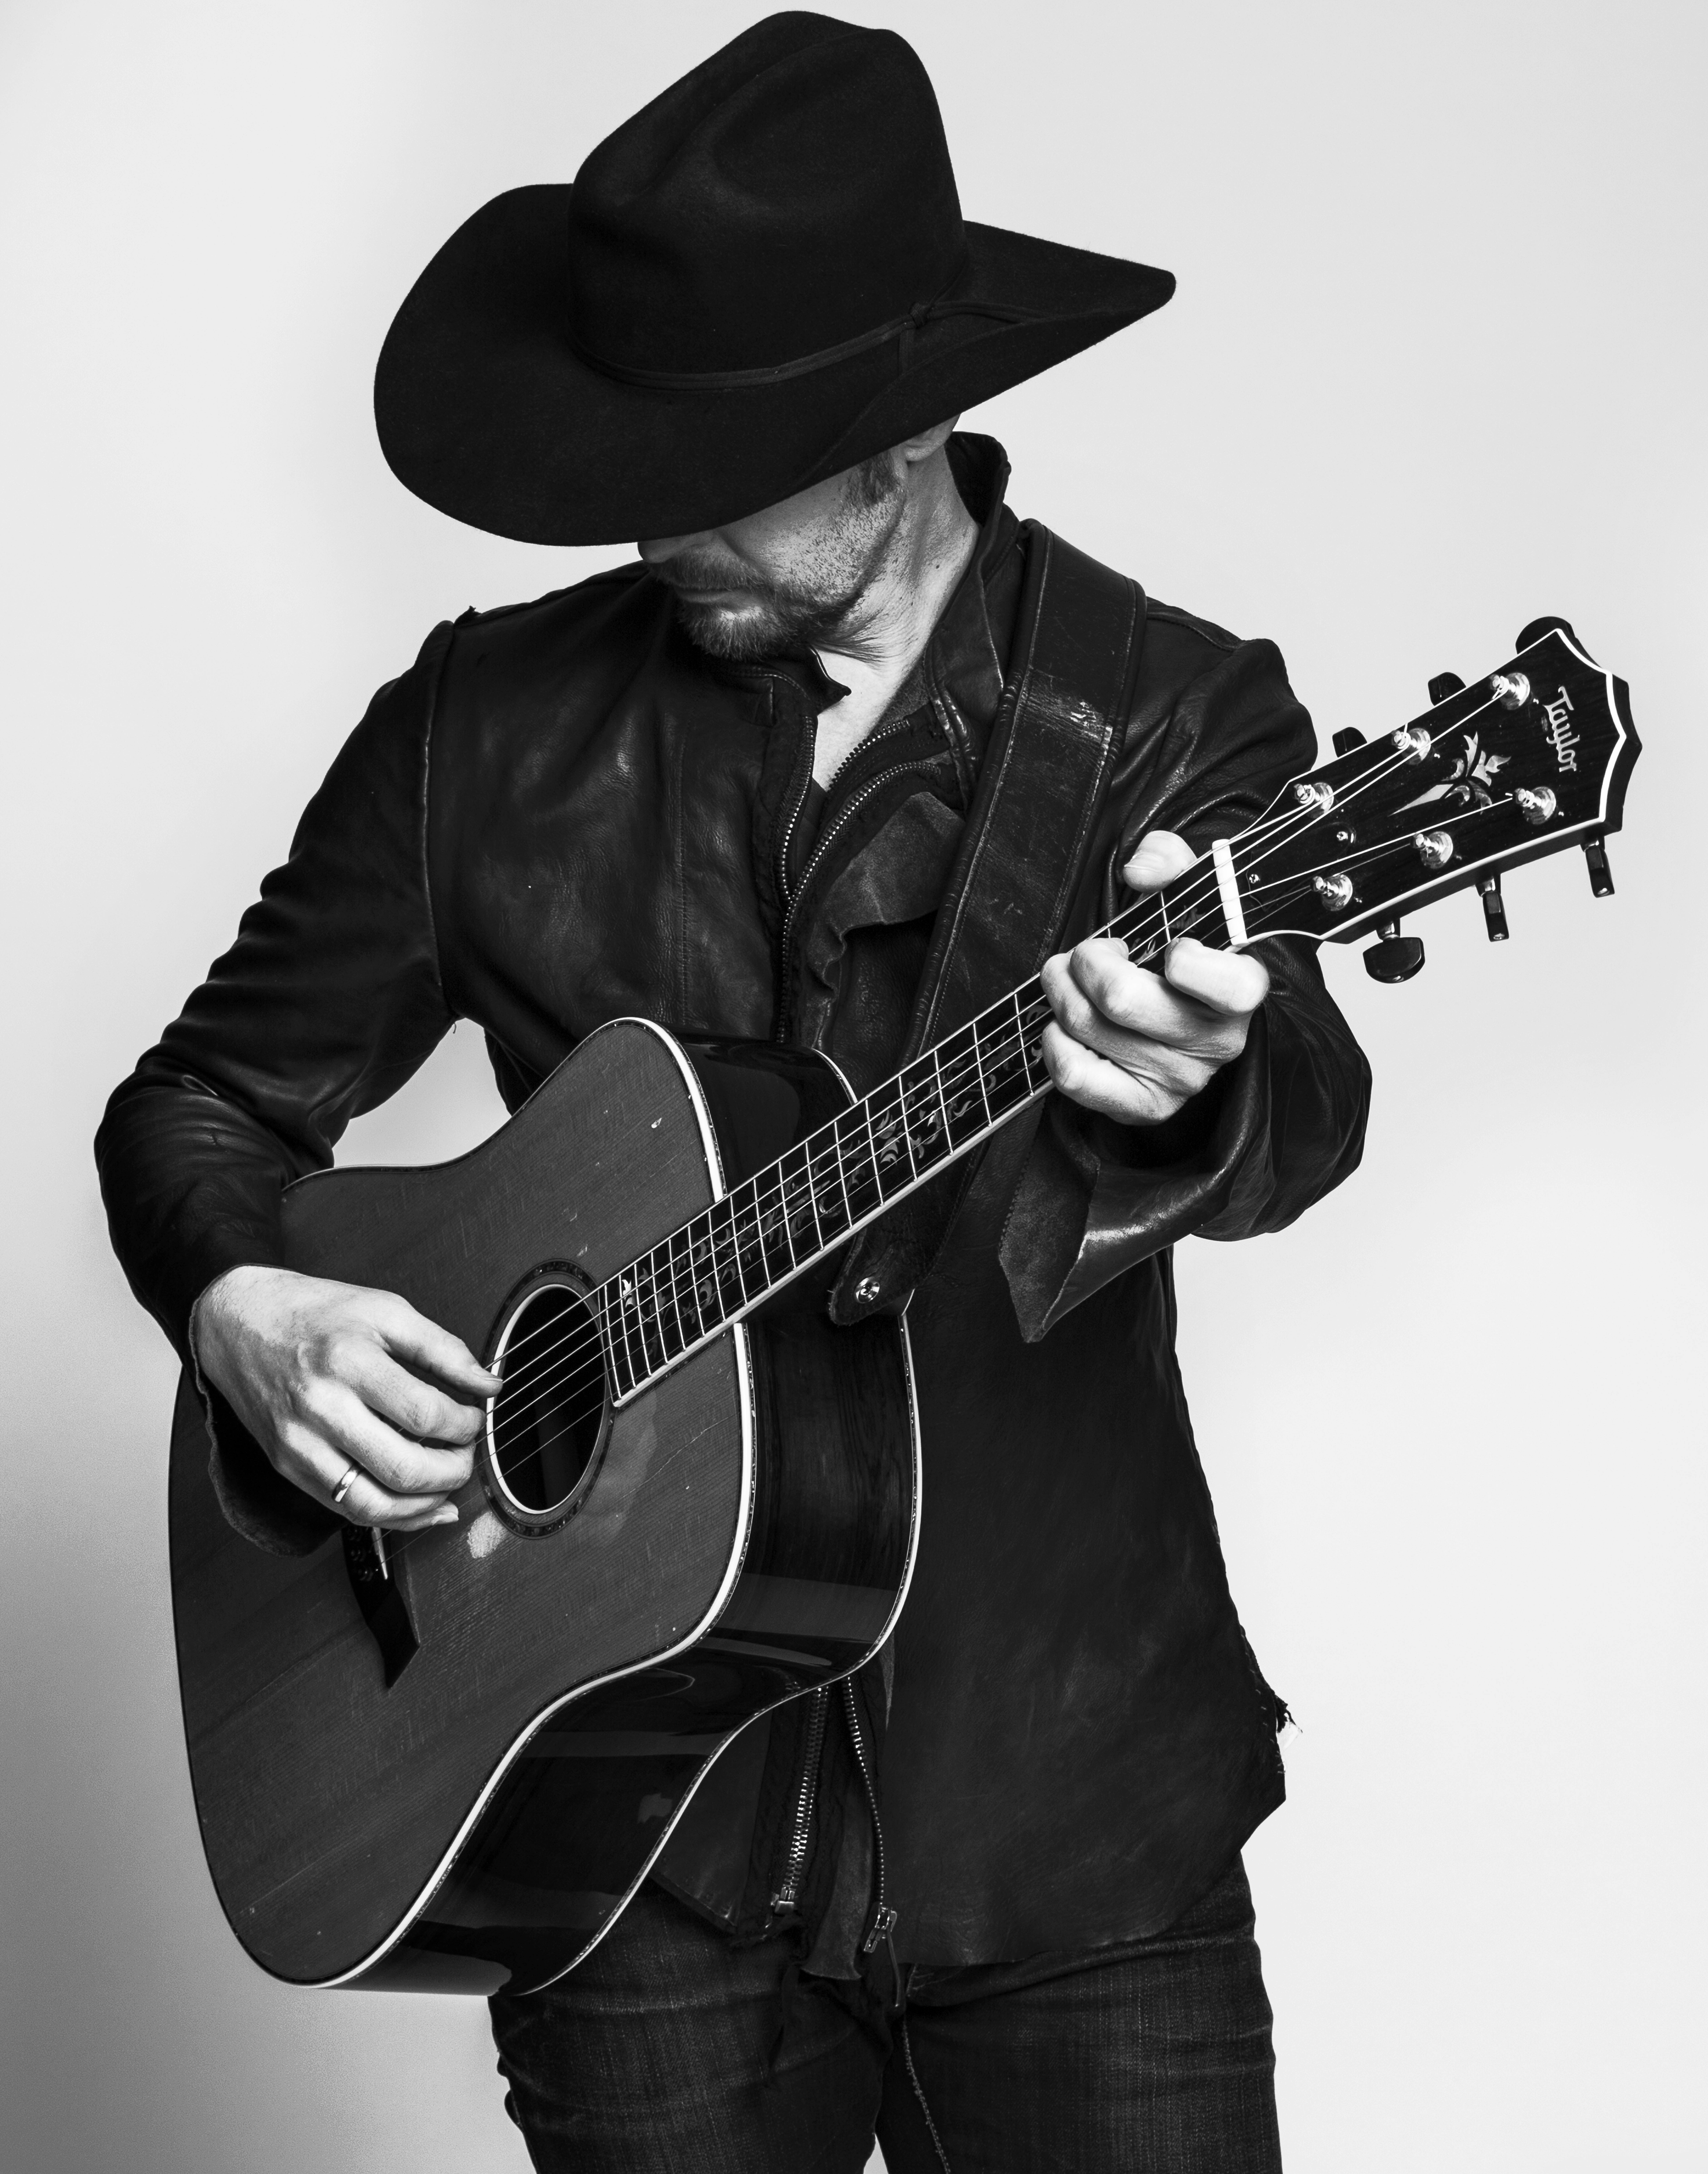 ON THE ROAD – Paul Brandt is set to hit the road in a co-headlining tour along with Dean Brody next month. They make a stop in Red Deer Oct. 6th